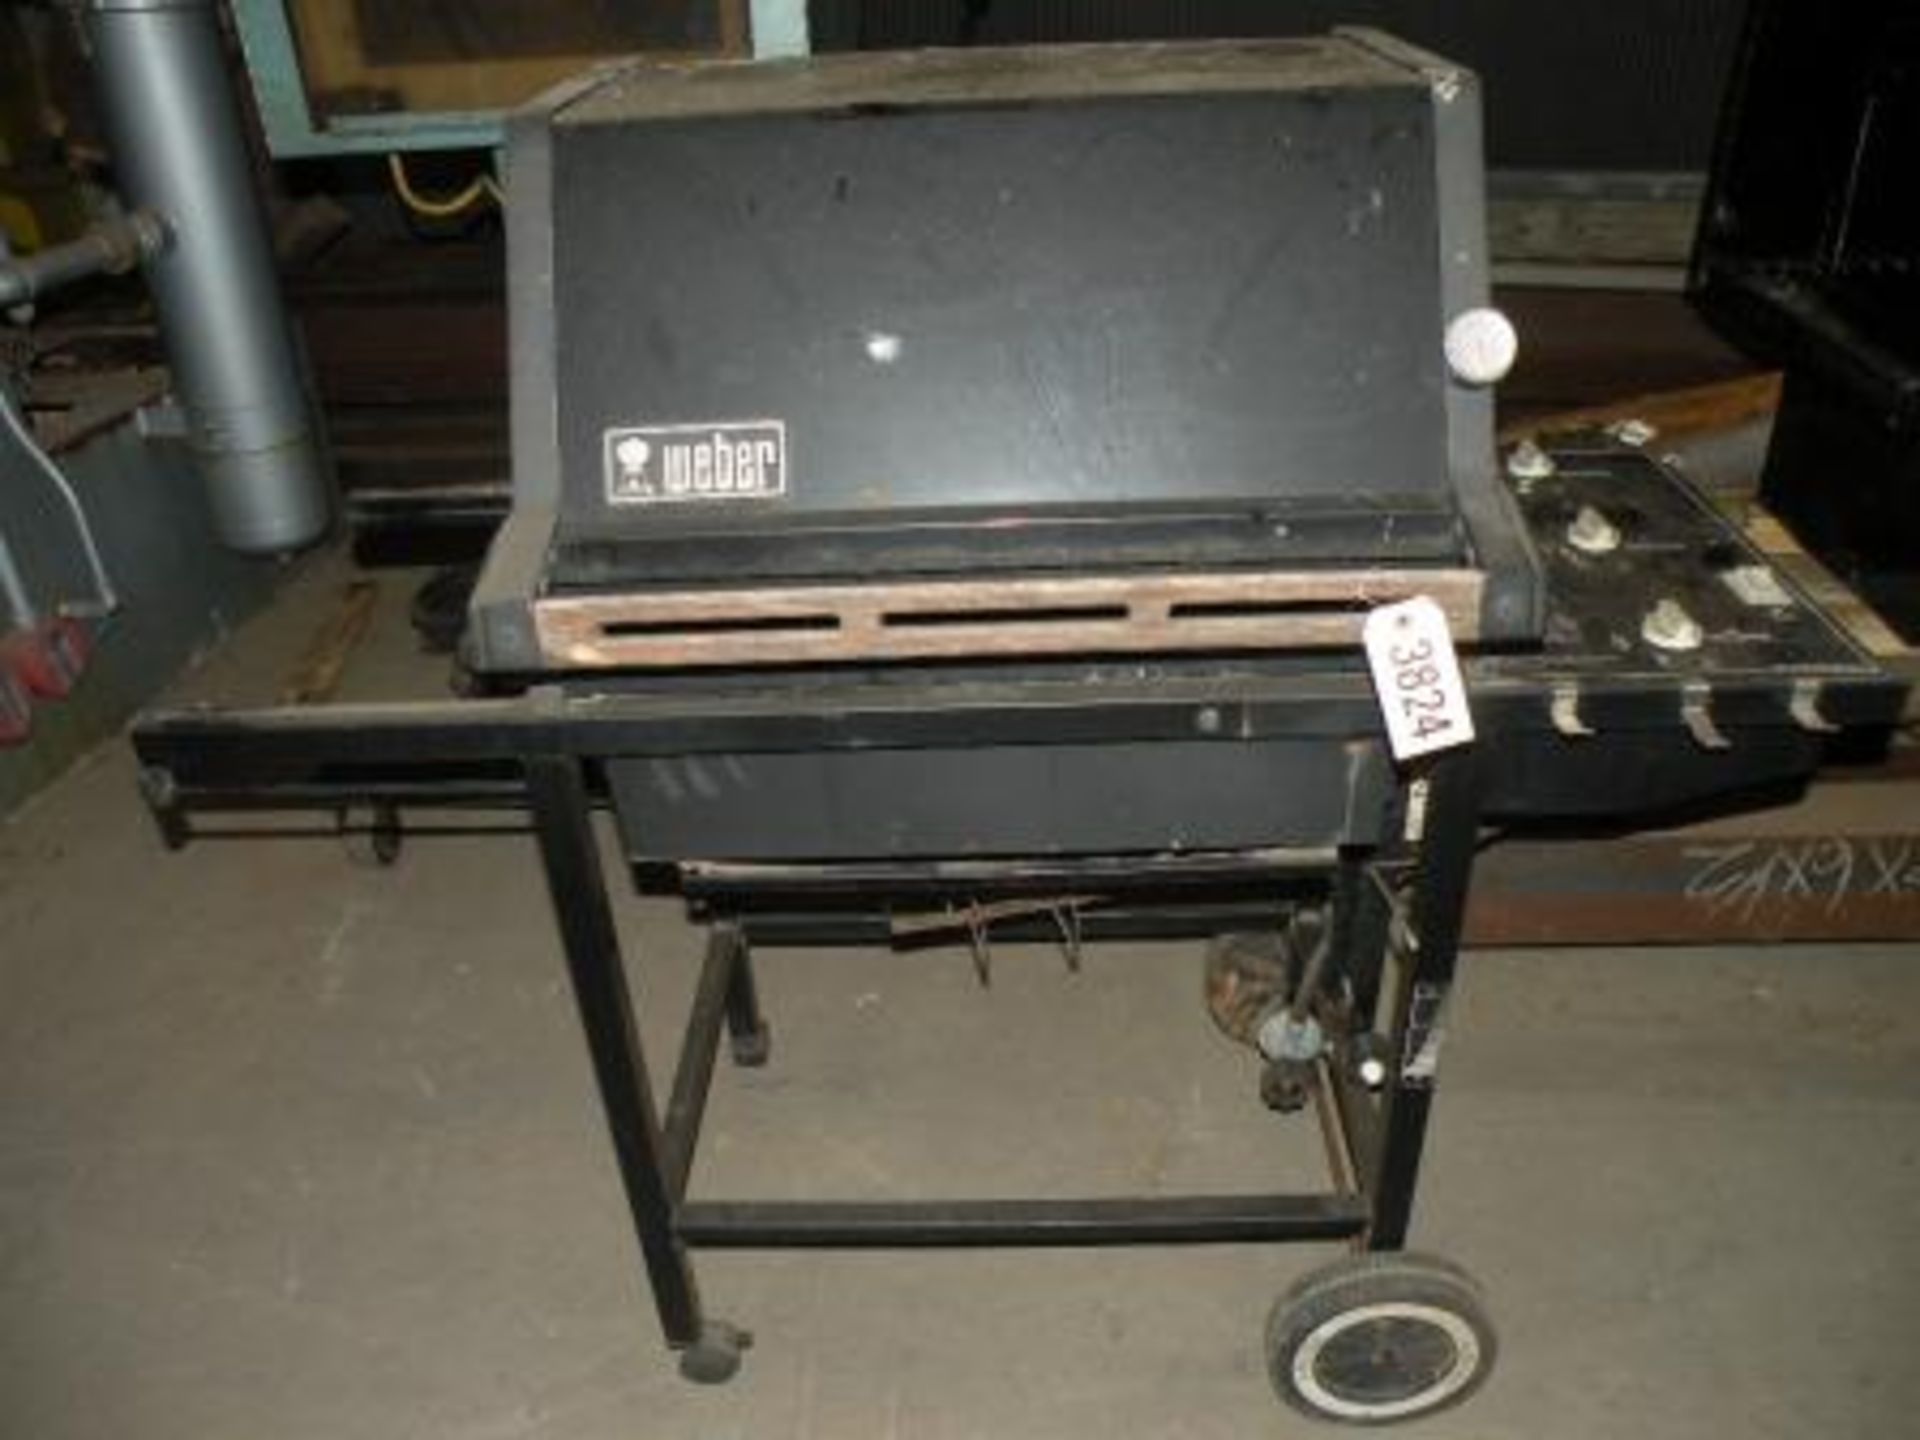 Weber Gas Grill with Cover (So. Fulton, TN)